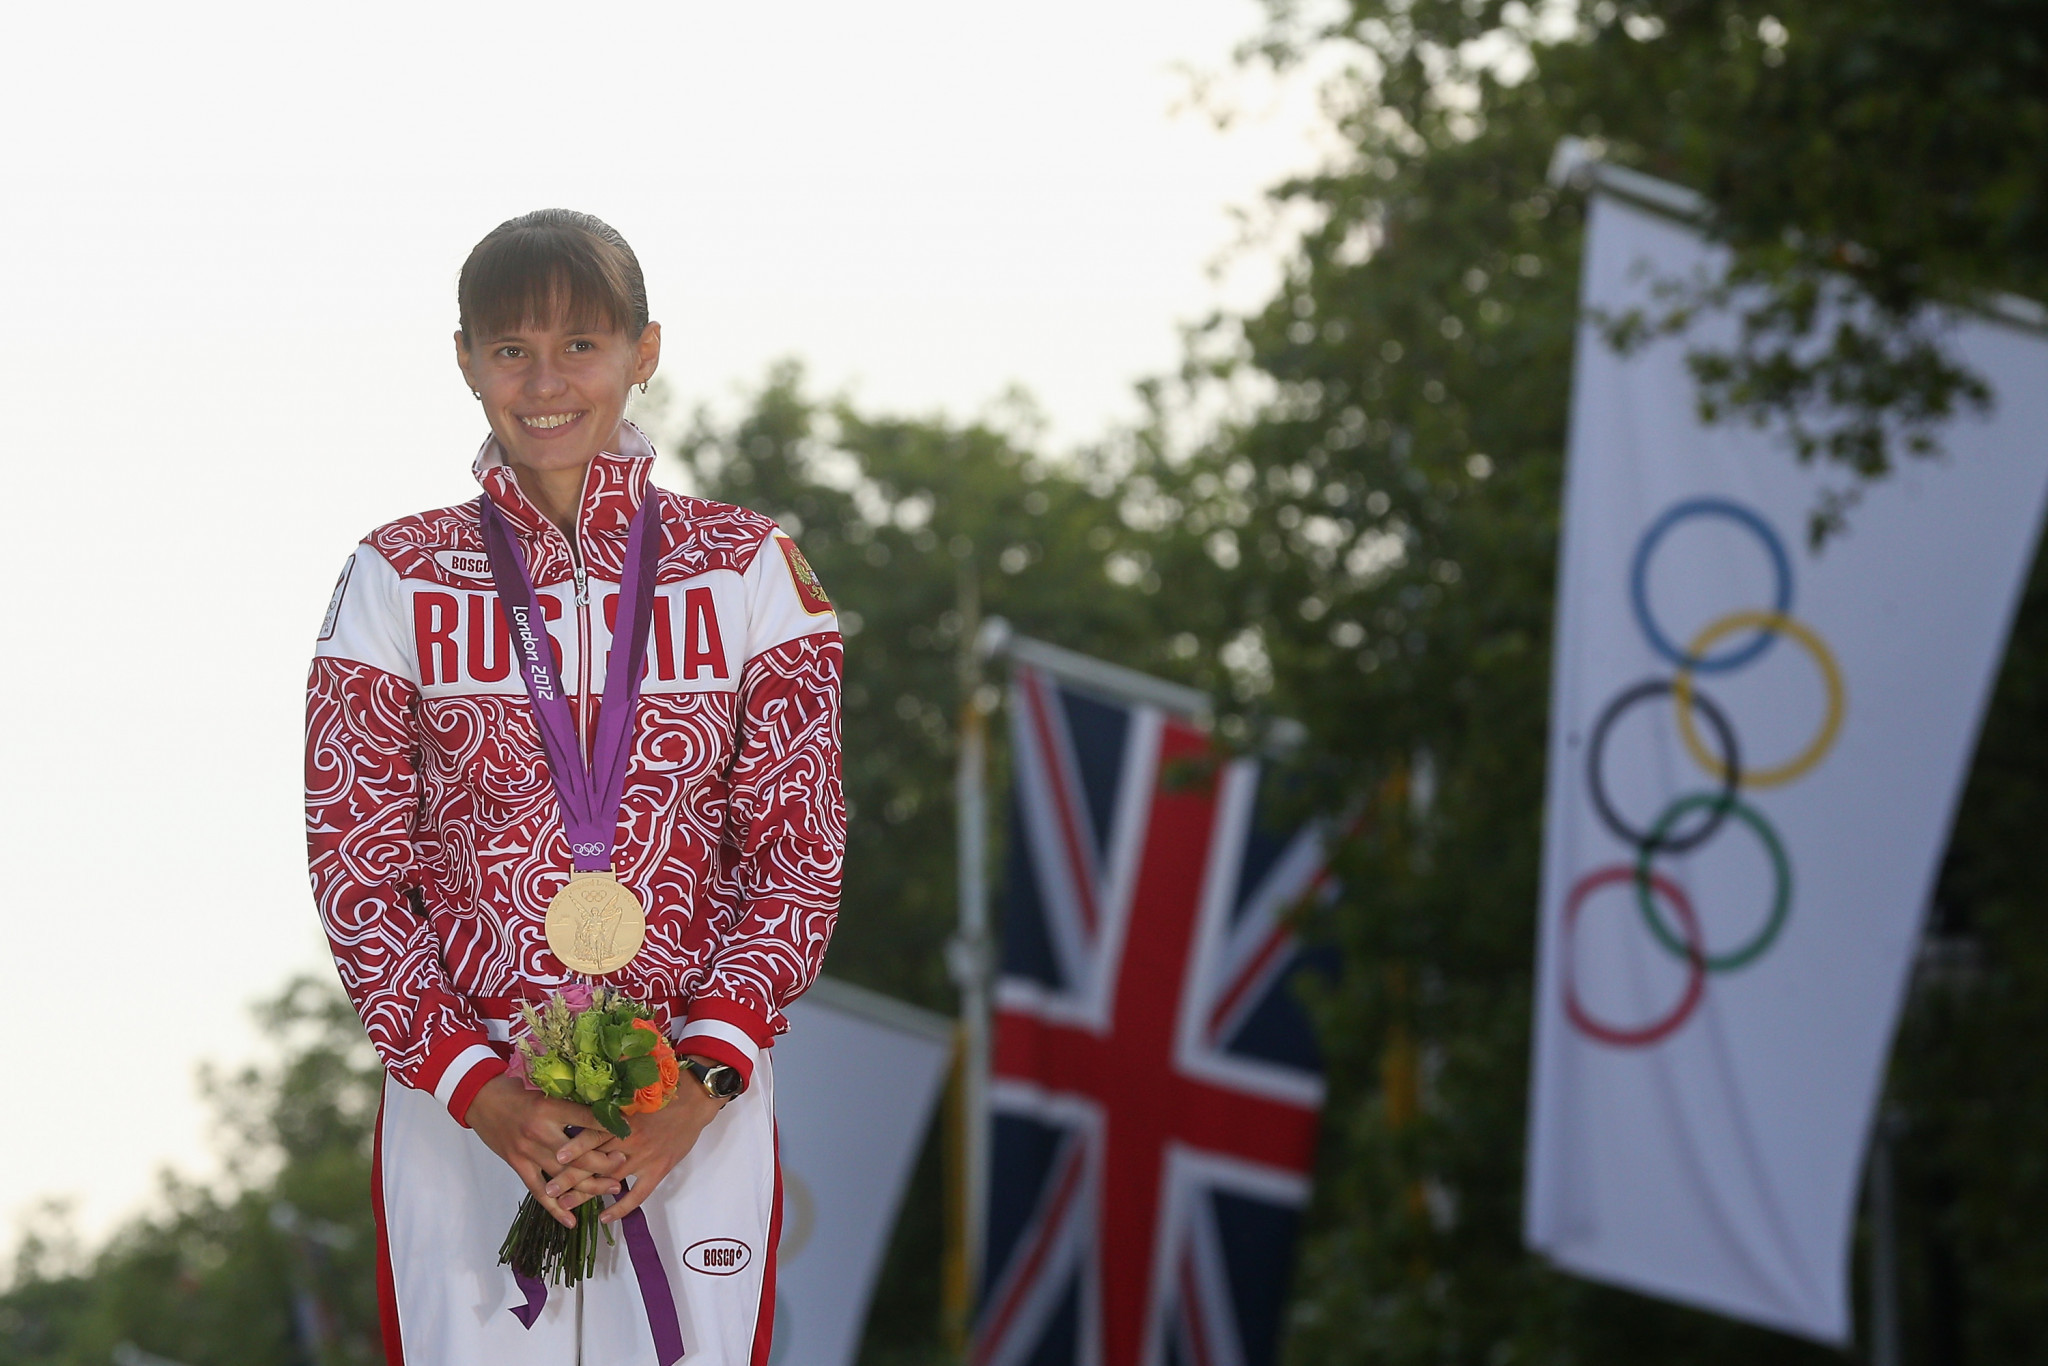 Yelena Lashmanova will be stripped of her London 2012 race walk gold medal ©Getty Images